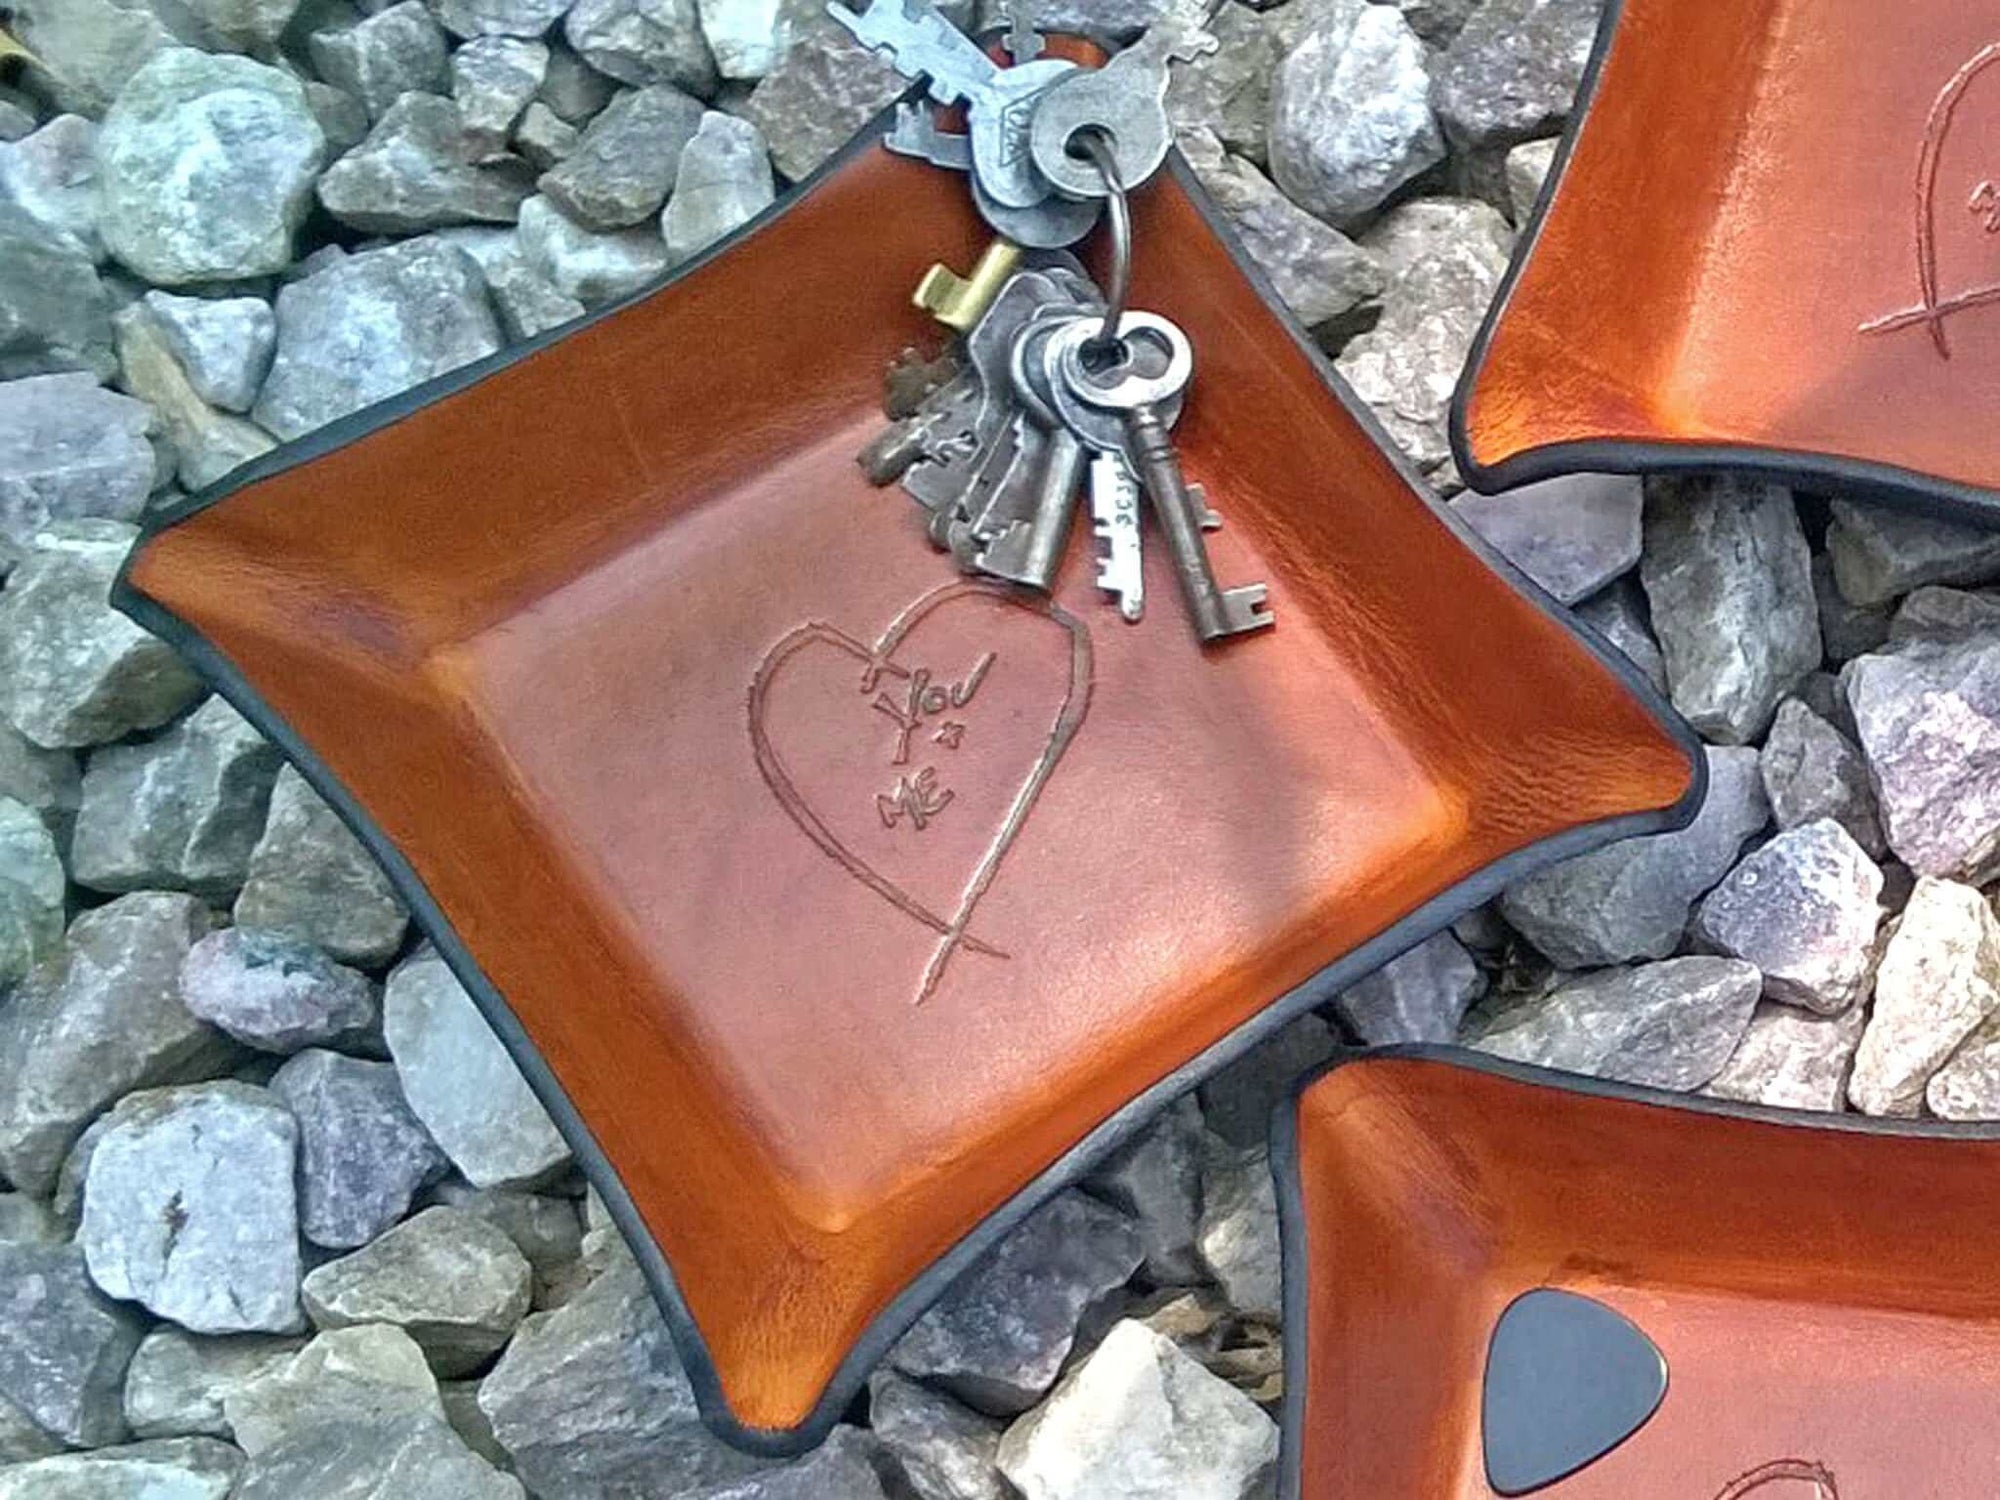 Leather tray with heart image. Third anniversary gift. 